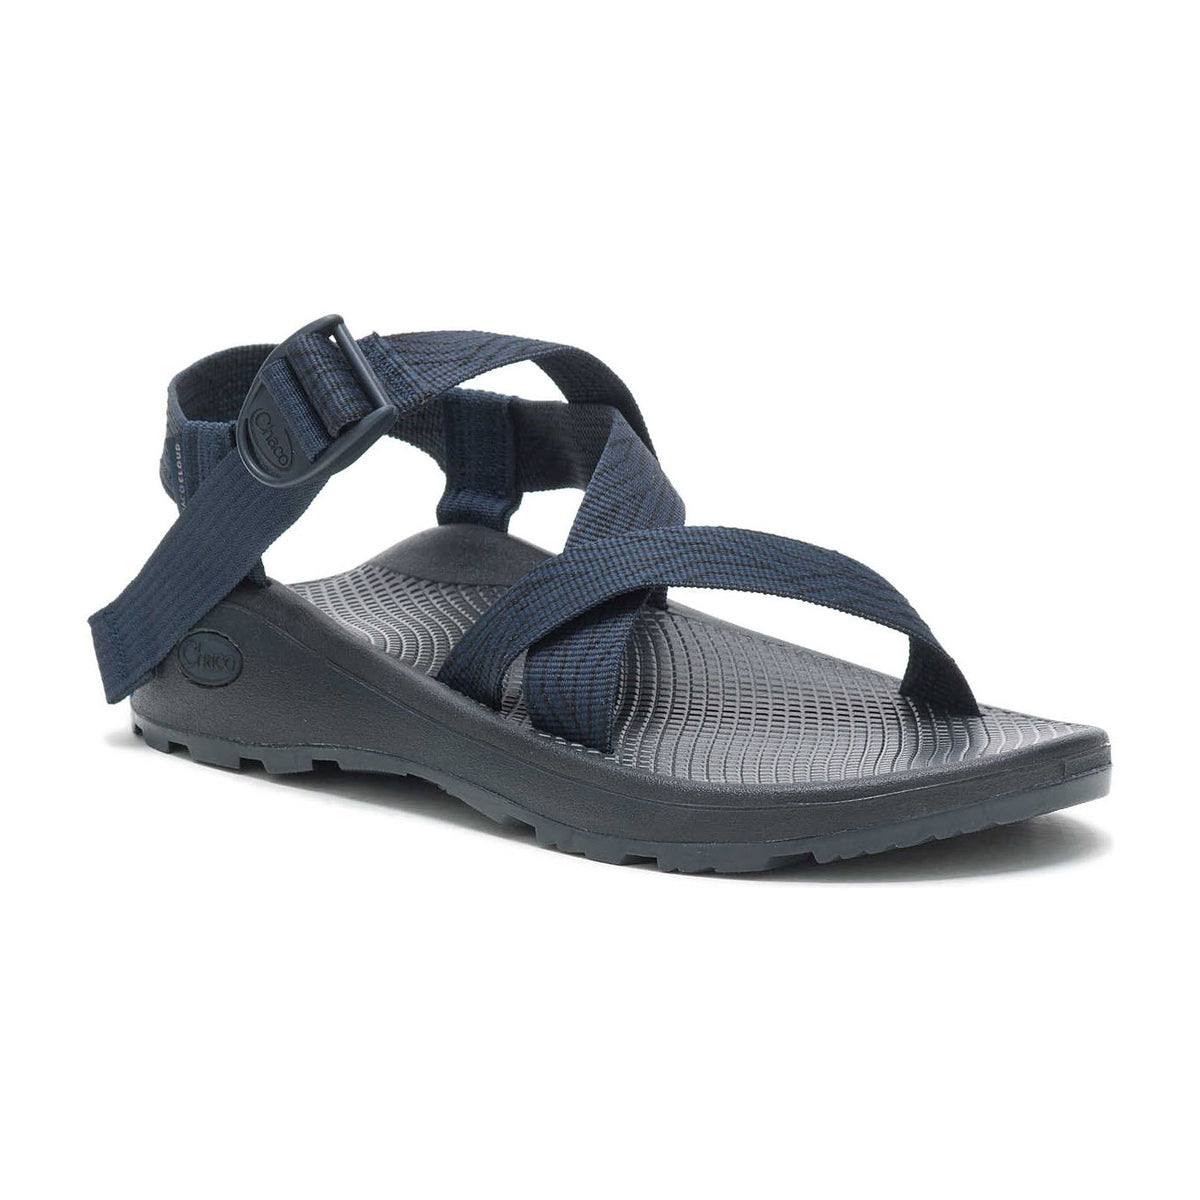 A single blue Chaco Z/Cloud sandal with adjustable straps and a circular logo on the side, displayed against a white background.